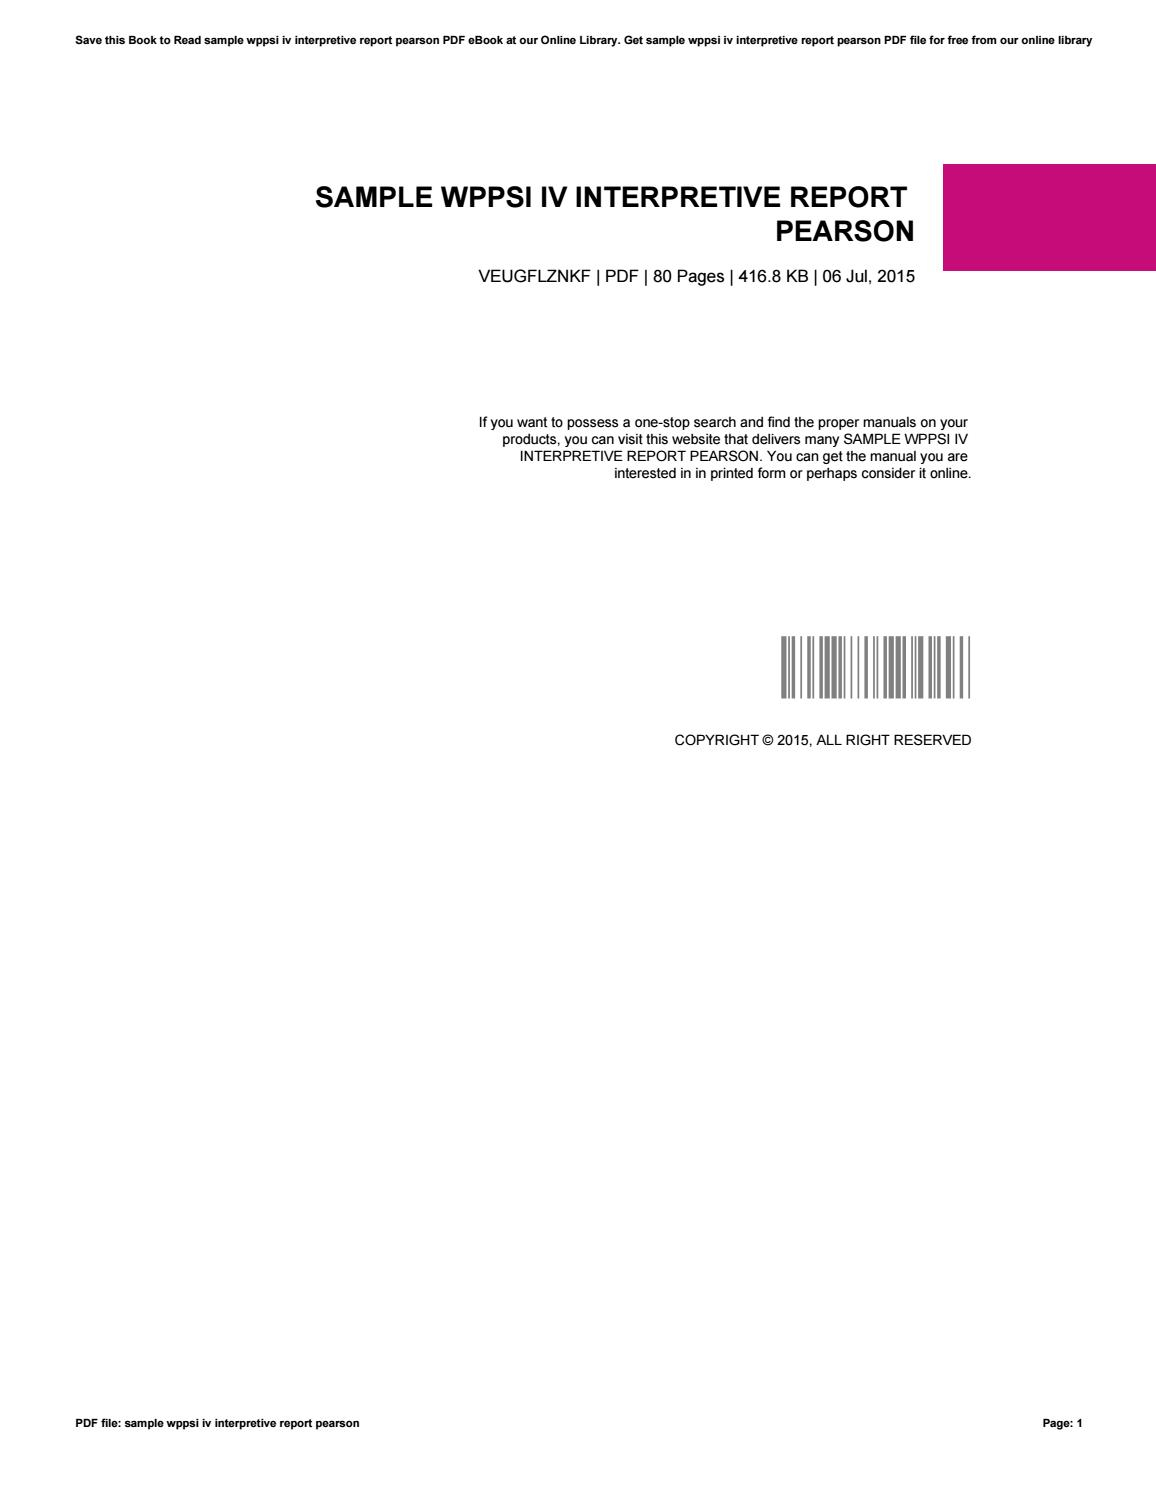 Sample Wppsi Iv Interpretive Report Pearson Intended For Wppsi Iv Report Template